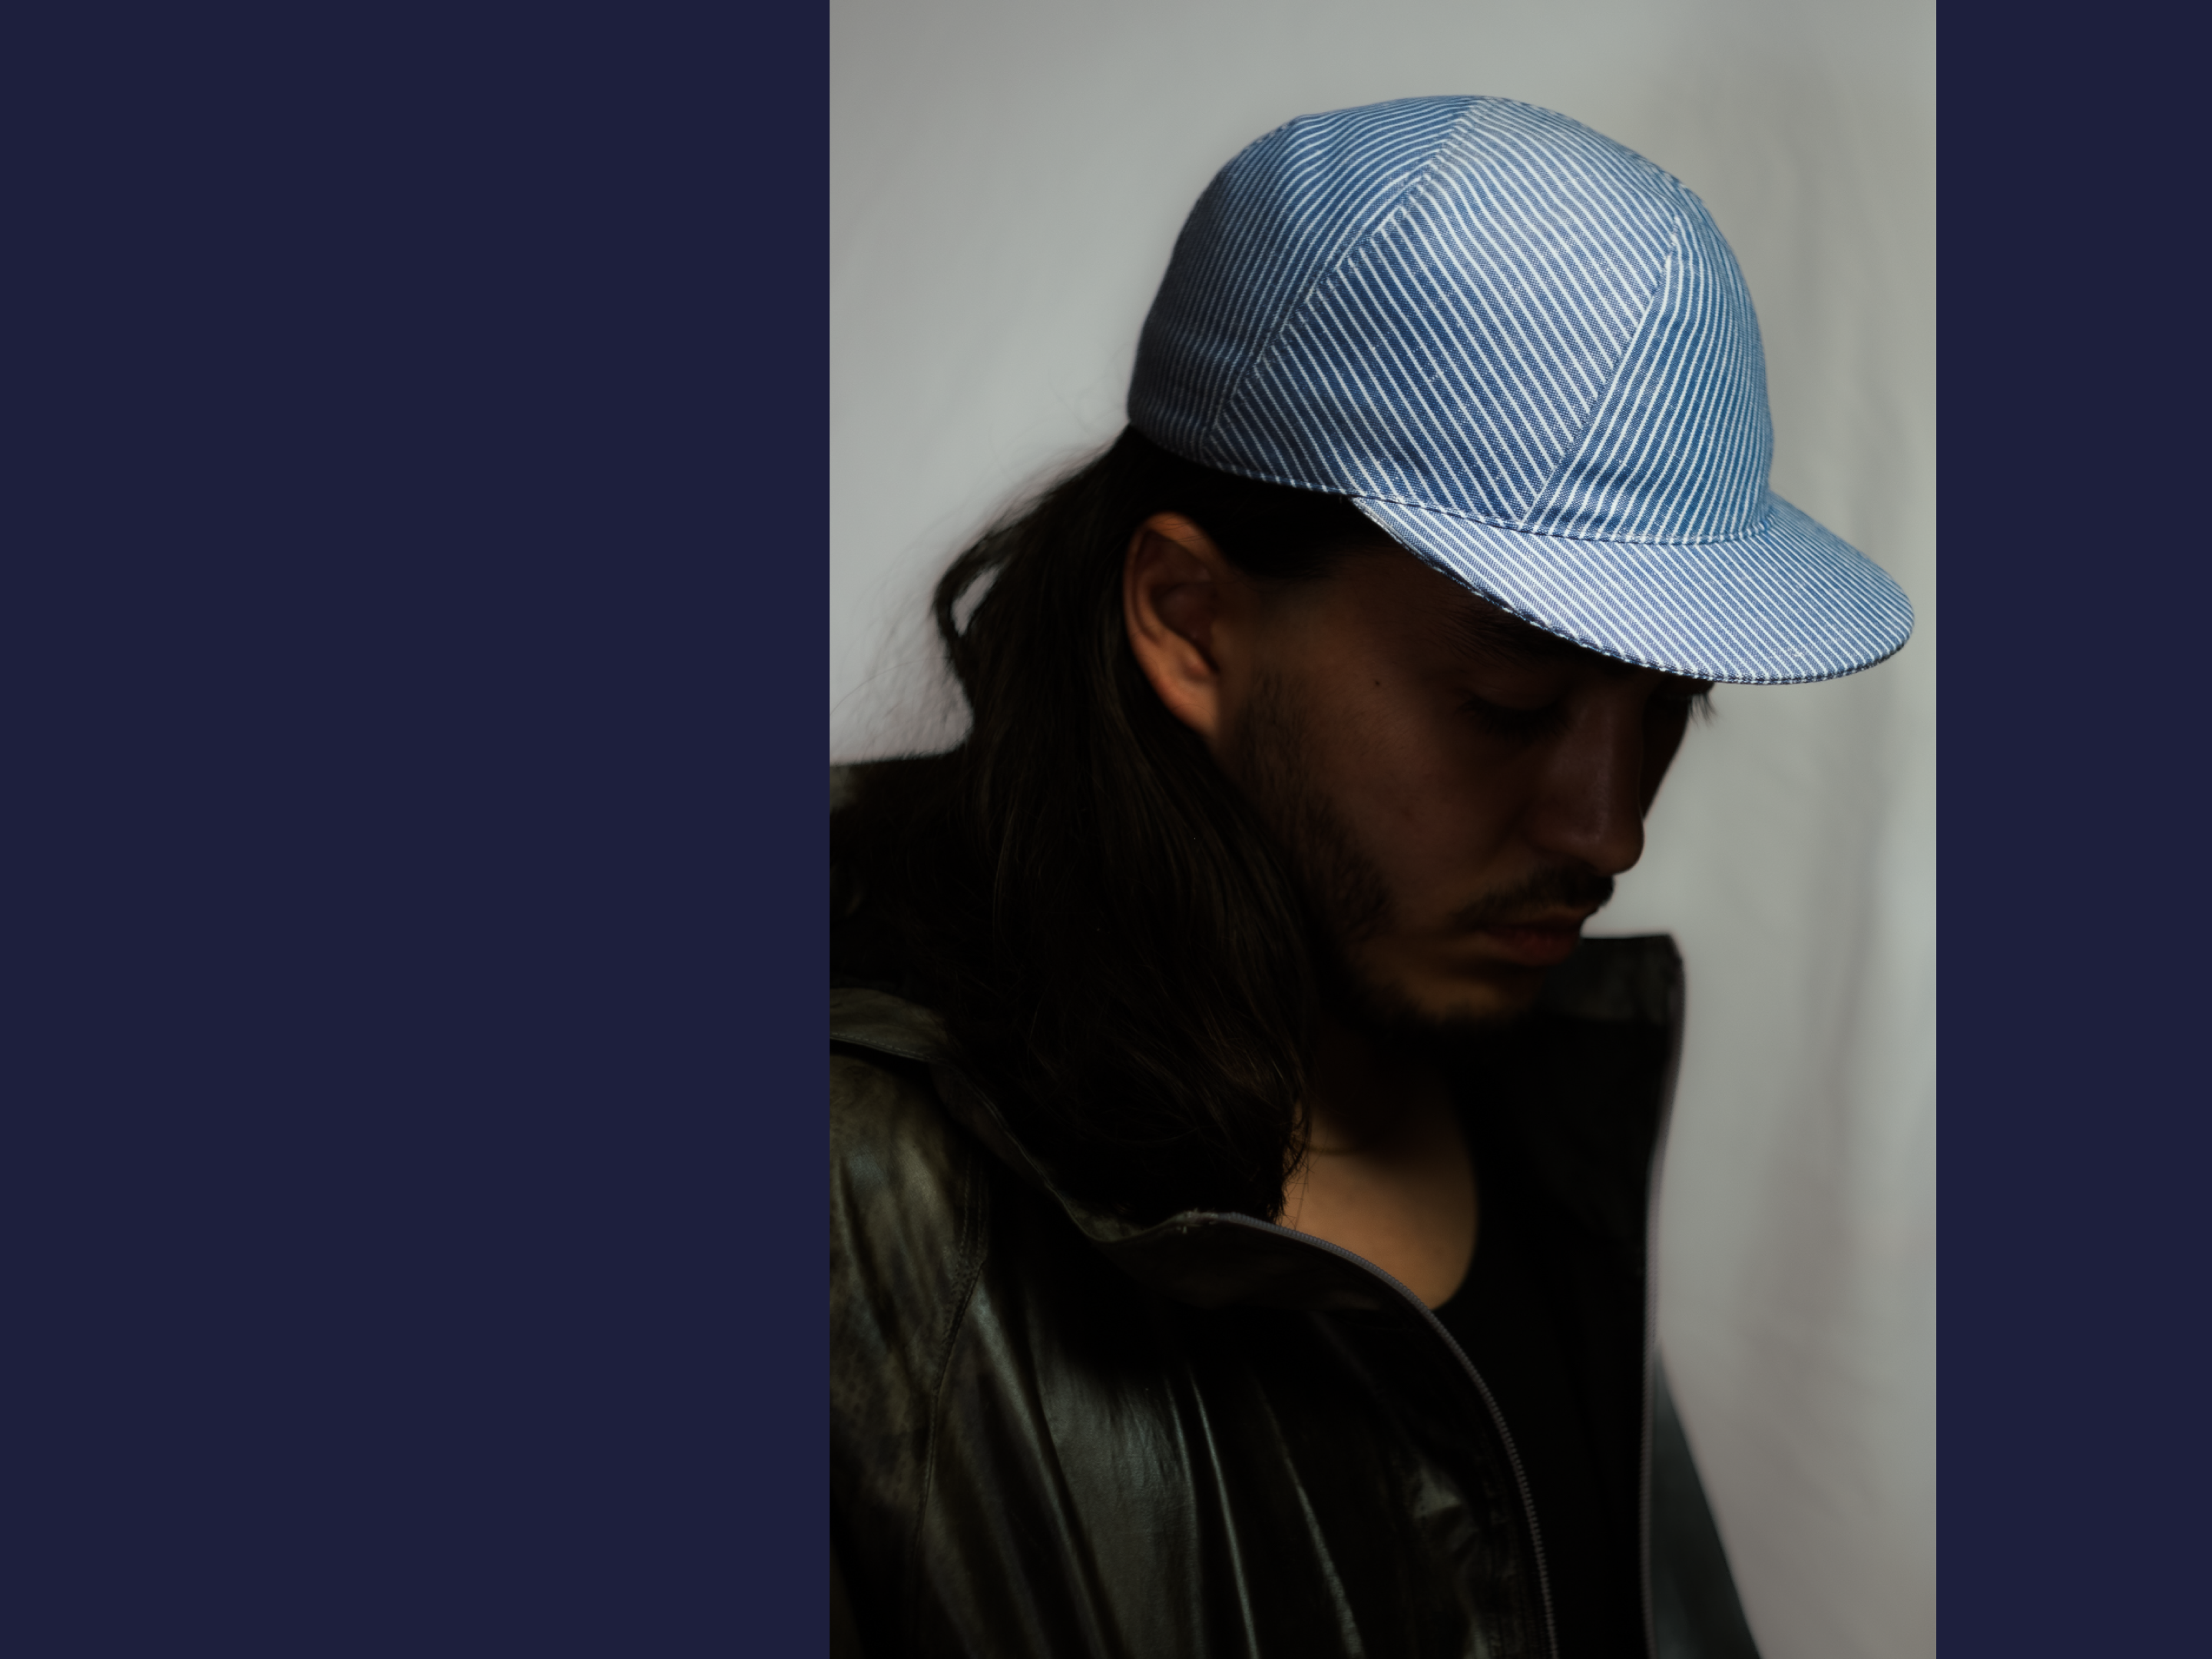 Kaïto is wearing a Le Panache Paris© cap made in France with blue and wihte stripeweave100% cotton.